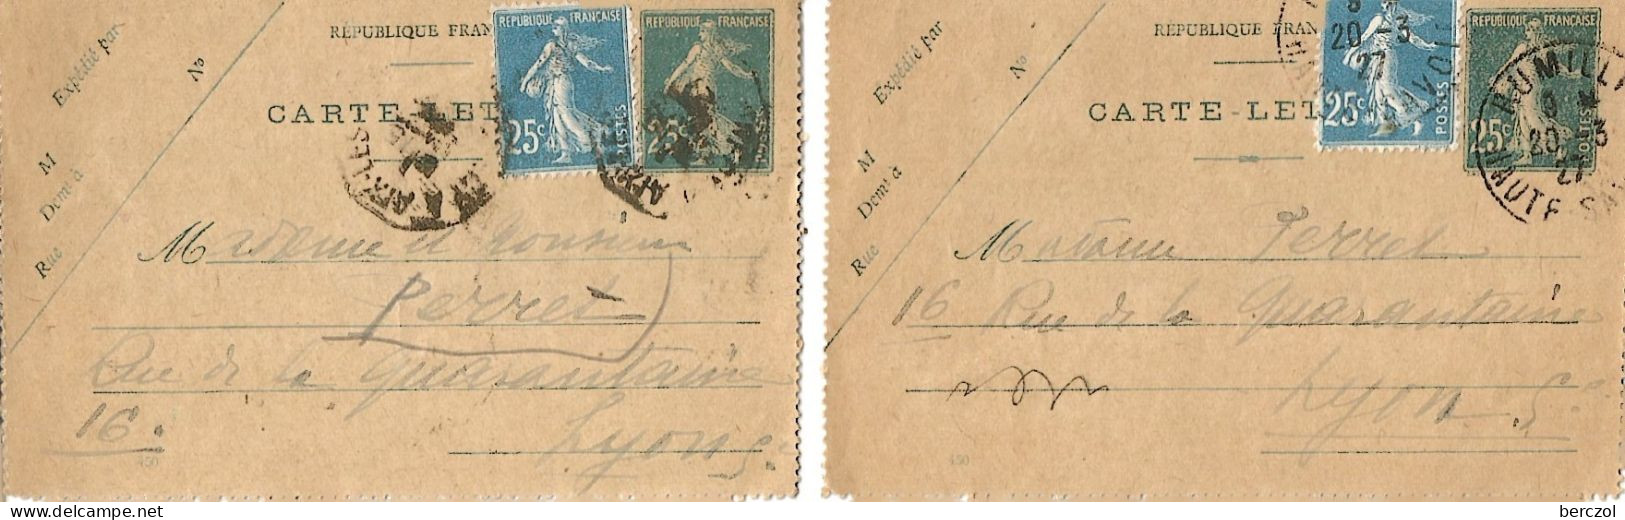 FRANCE ANNEE1907/1939 LOT DE 2 ENTIERS TYPE SEMEUSE CAMEE N° 140 CL1  TB DATE : 450 - Letter Cards